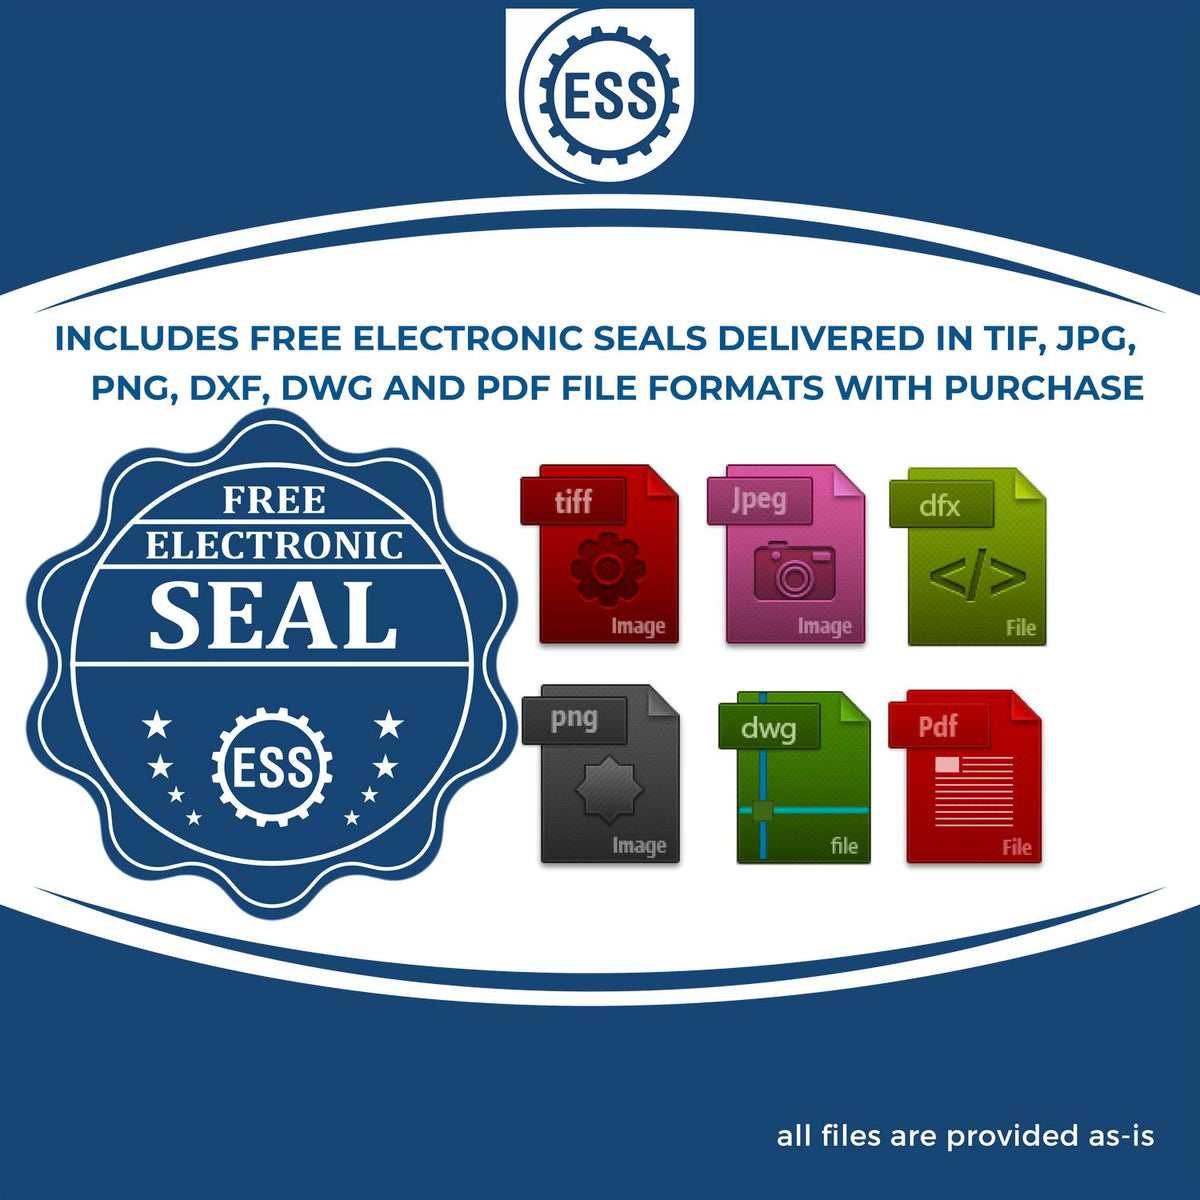 An infographic for the free electronic seal for the Self-Inking Rectangular Rhode Island Notary Stamp illustrating the different file type icons such as DXF, DWG, TIF, JPG and PNG.